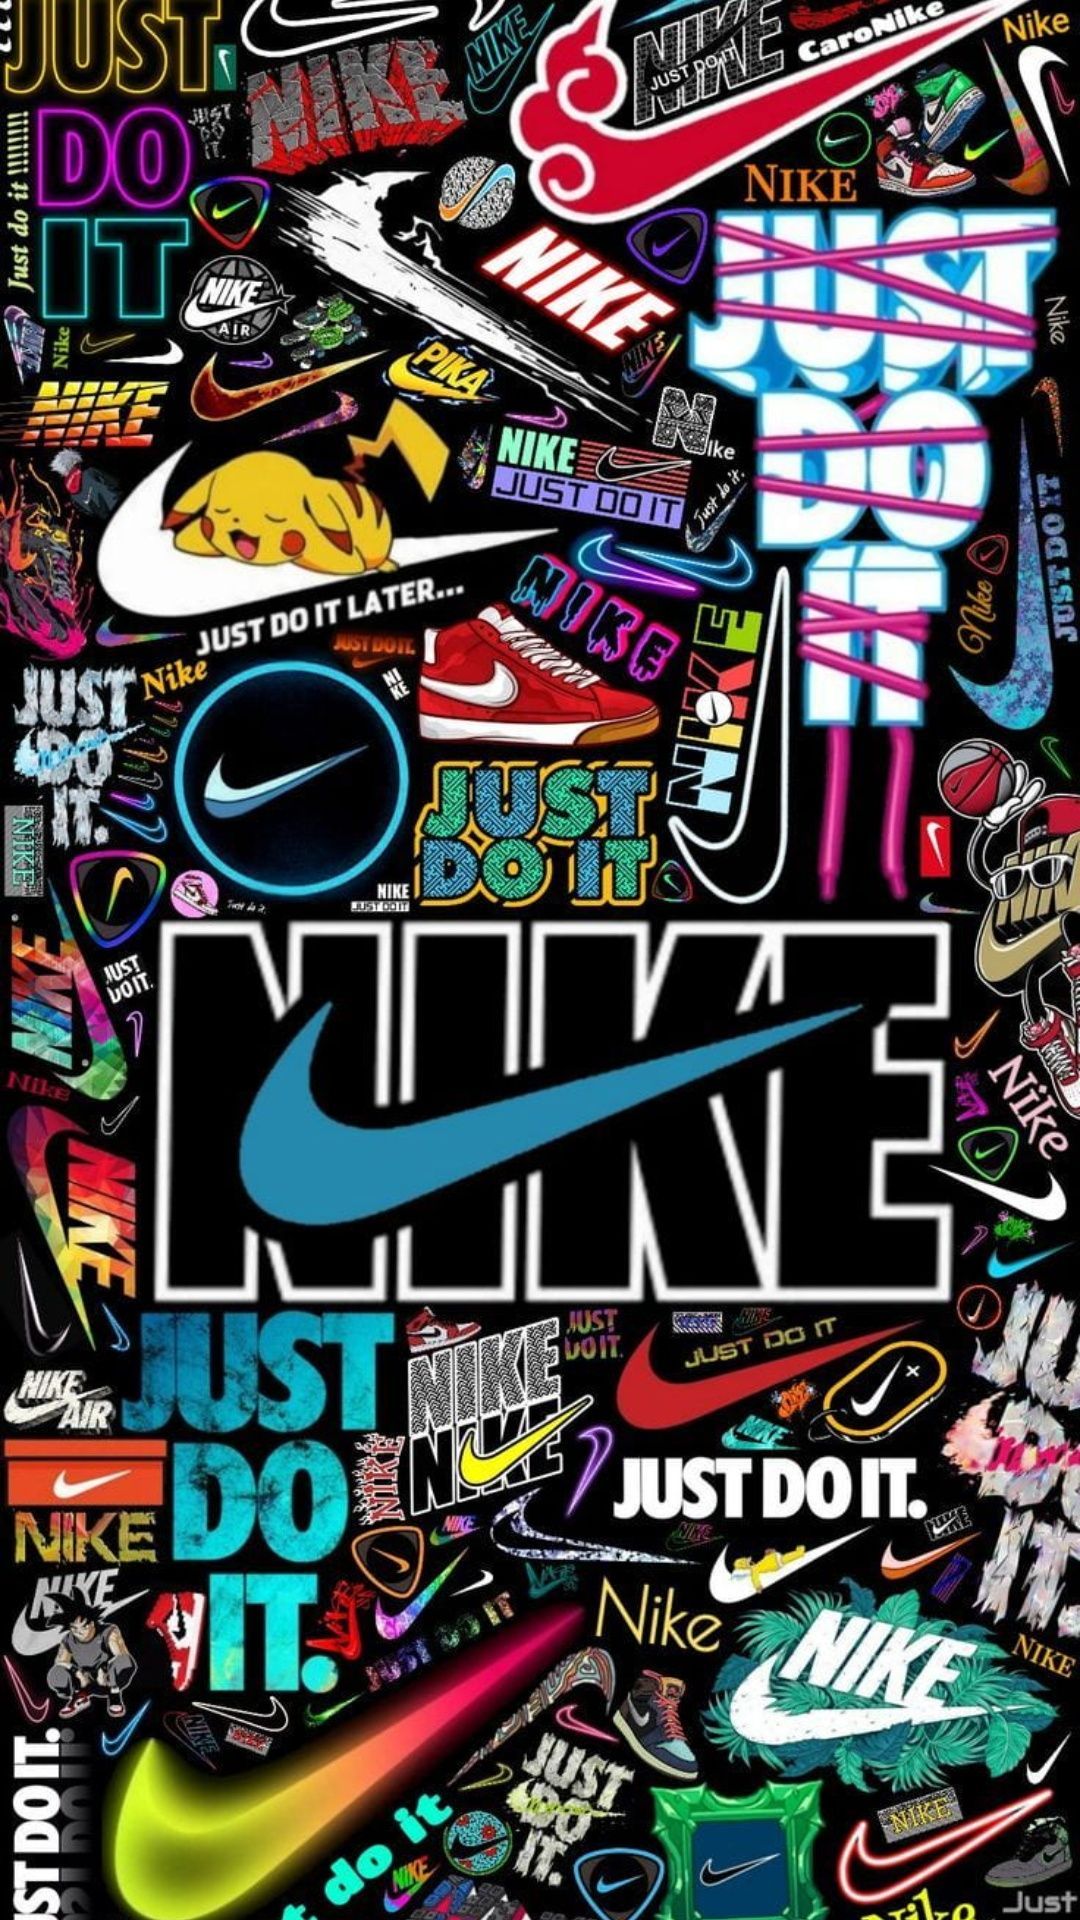 Nike wallpaper for iPhone and Android! - Nike